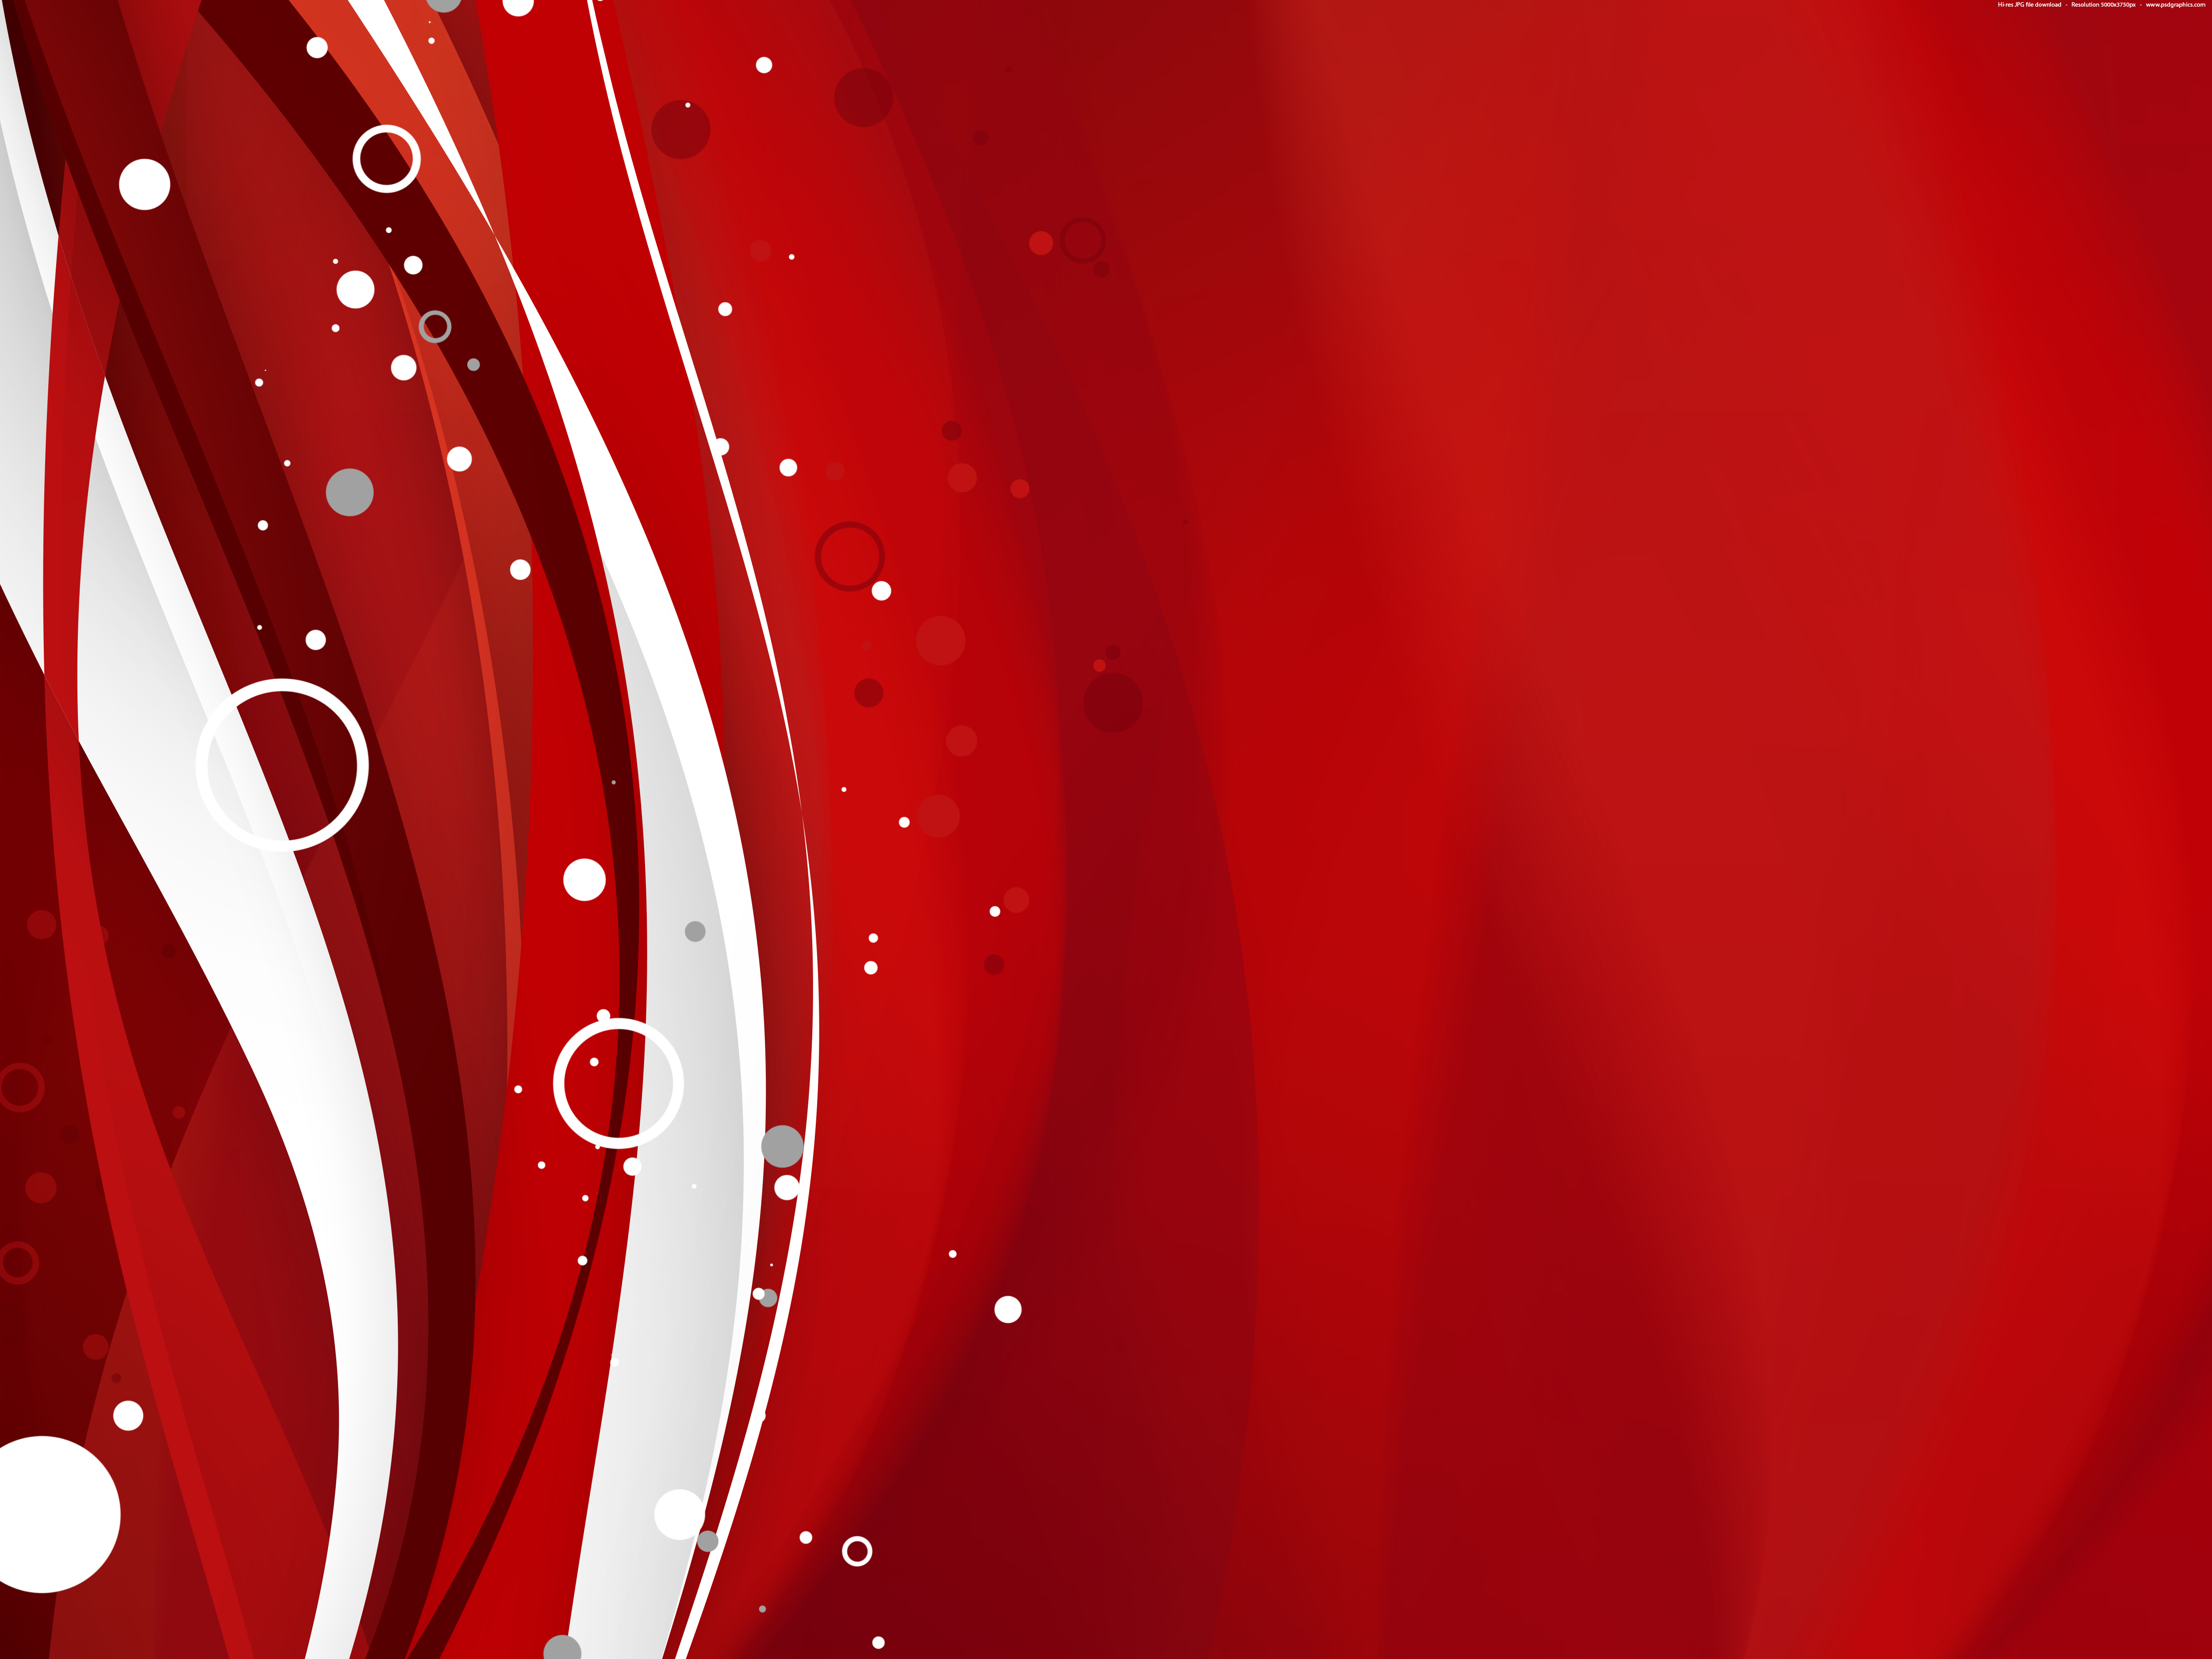 Red and white Christmas wallpapers free image download